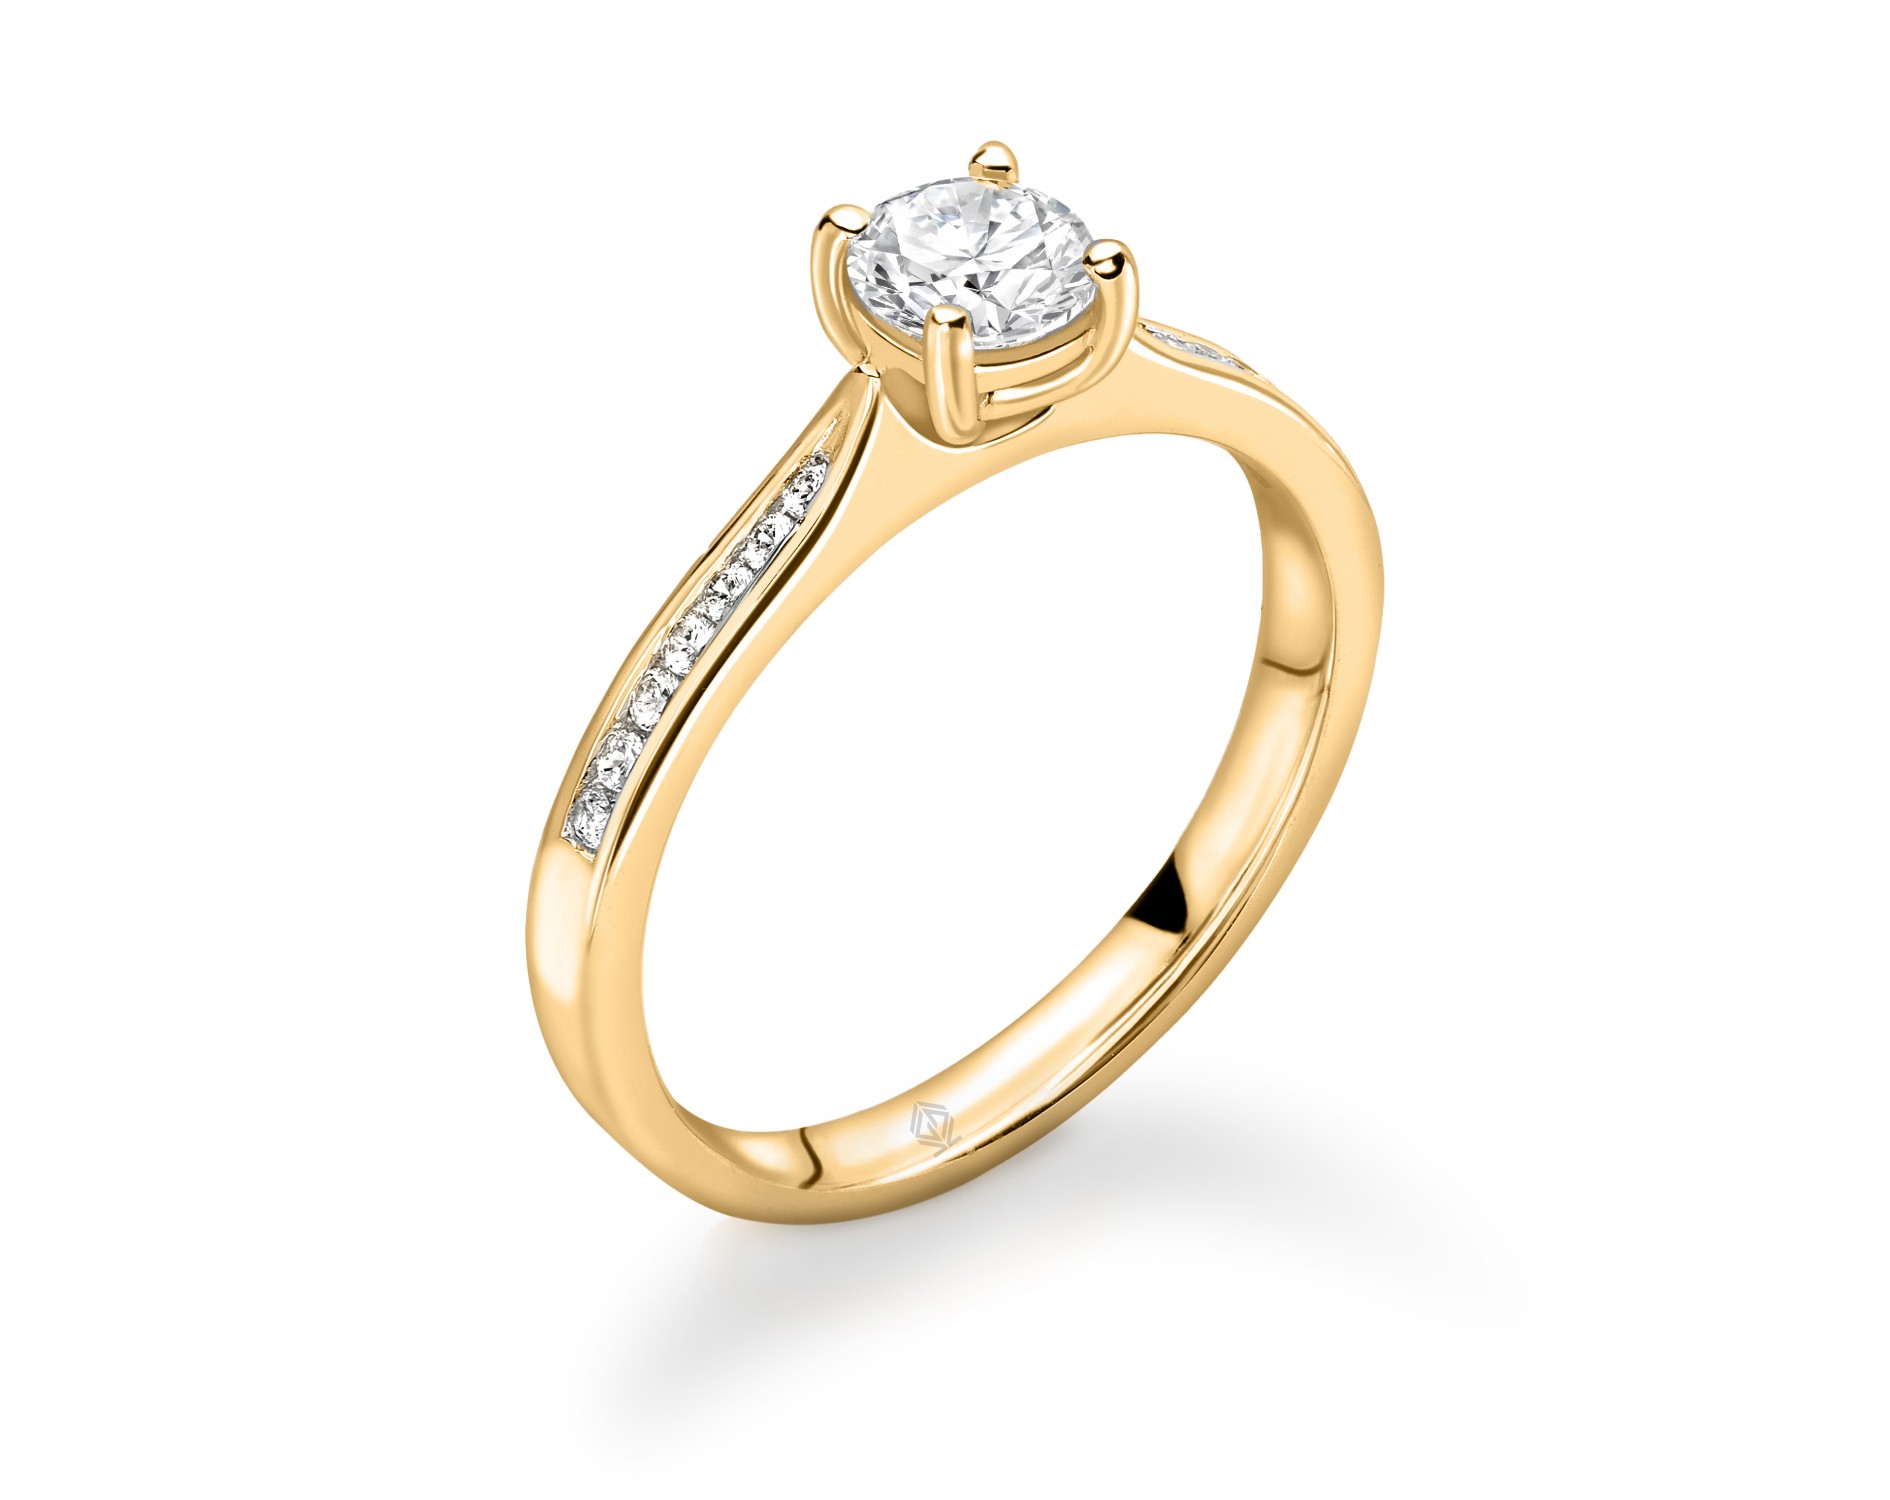 18K YELLOW GOLD 4 PRONGS ROUND DIAMOND ENGAGEMENT RING WITH SIDE STONES CHANNEL SET